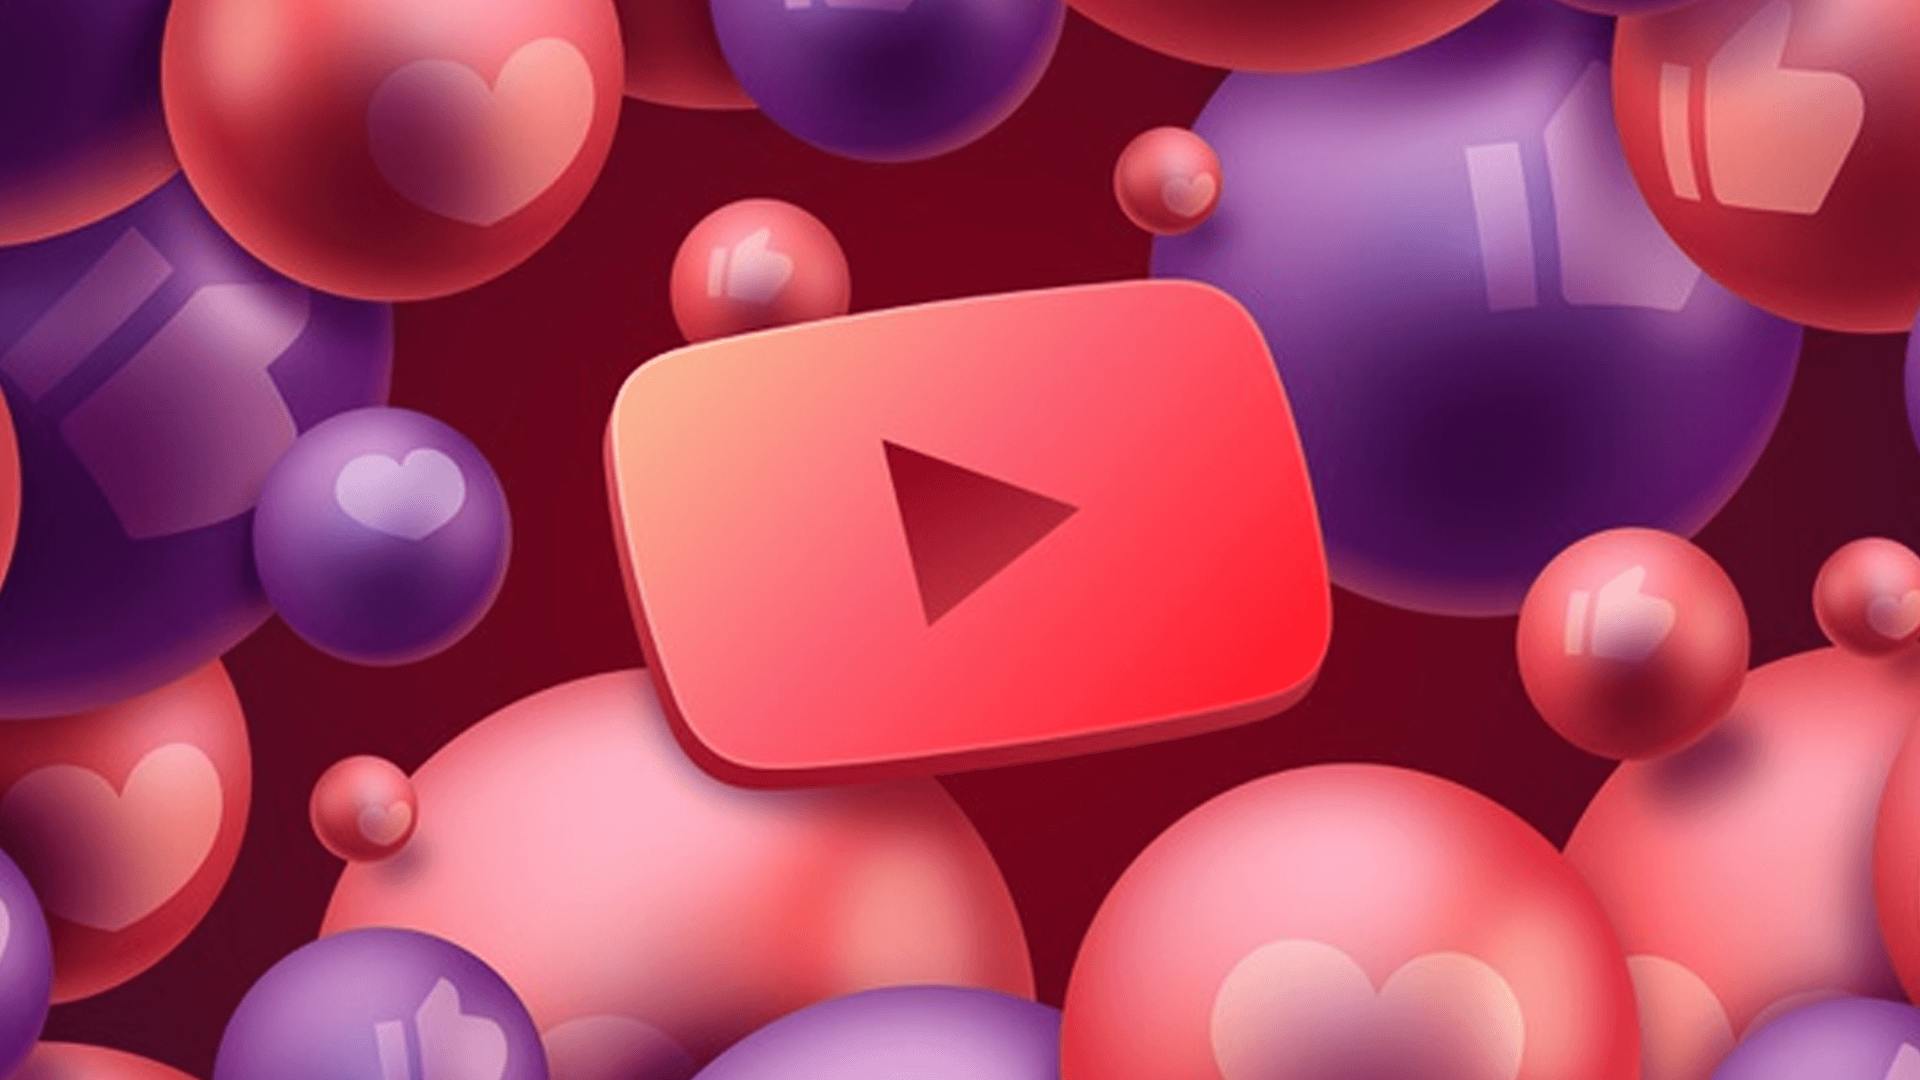 YouTube | Article about the promotion of the YouTube channel